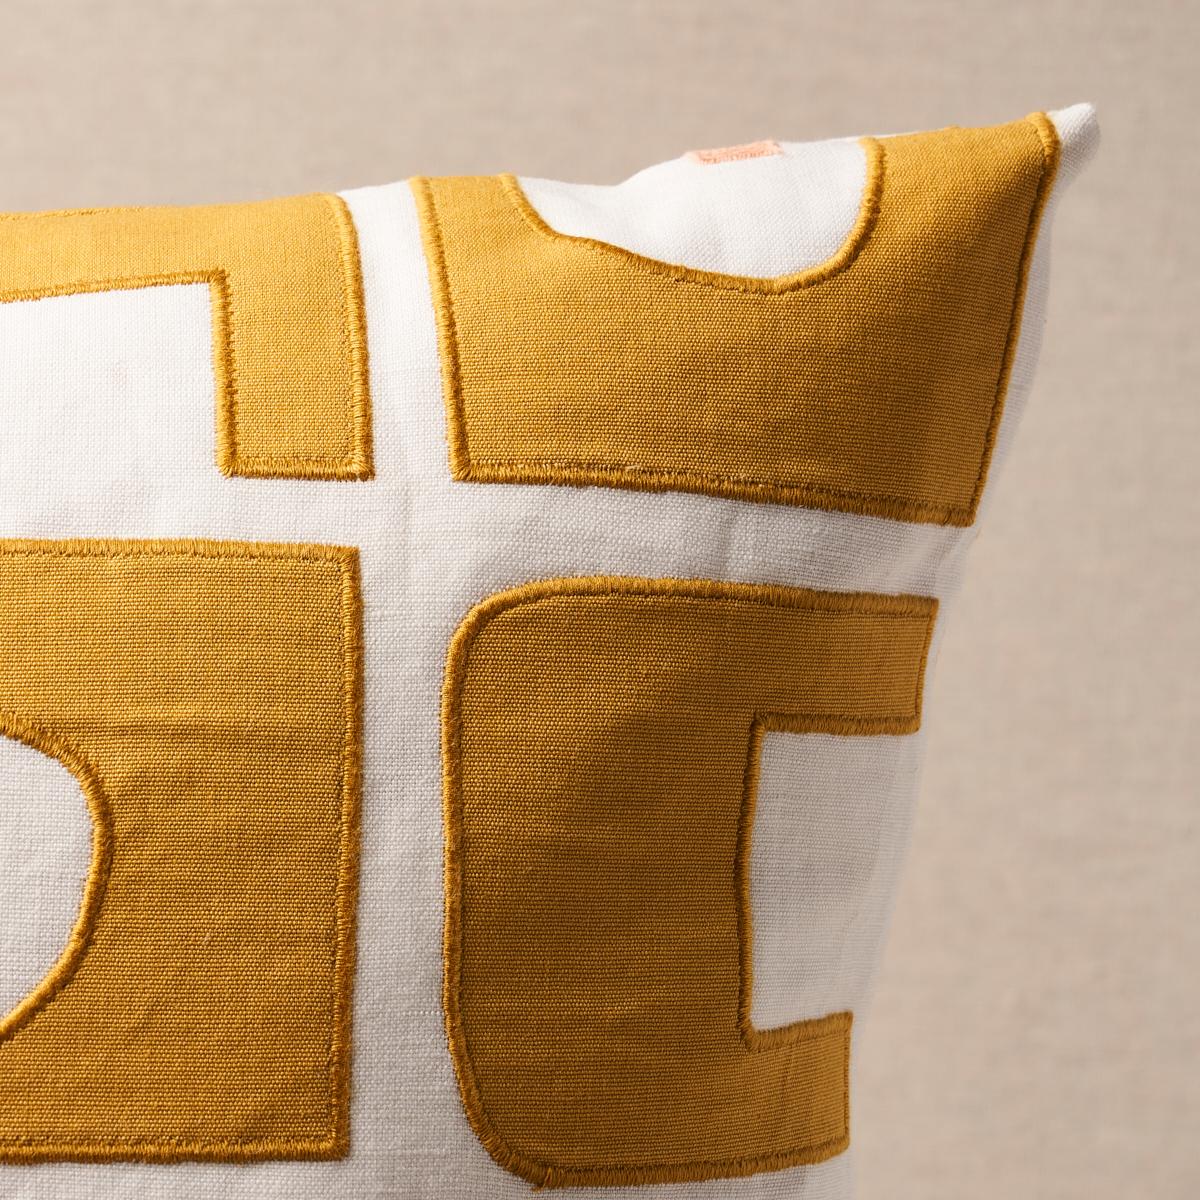 This pillow features Den Applique by Hadiya Williams for Schumacher with a knife edge finish. Hadiya Williams’ Den Appliqué in ochre is a wonderfully imaginative irregular-grid pattern based on paper cutouts. Abstracted architectural shapes are